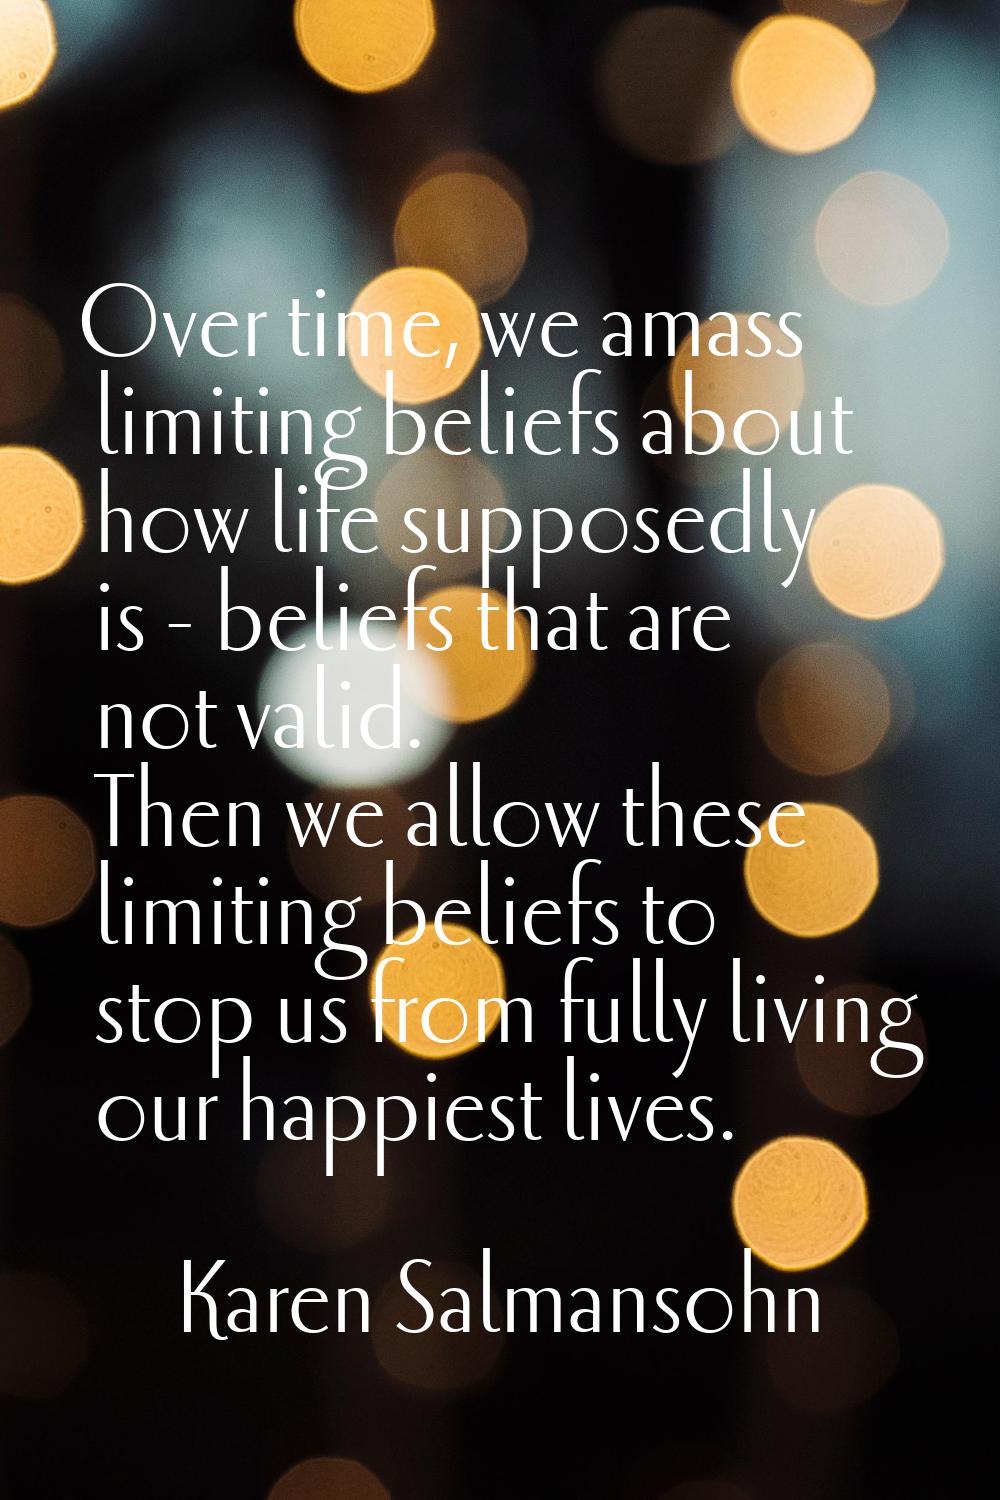 Over time, we amass limiting beliefs about how life supposedly is - beliefs that are not valid. The